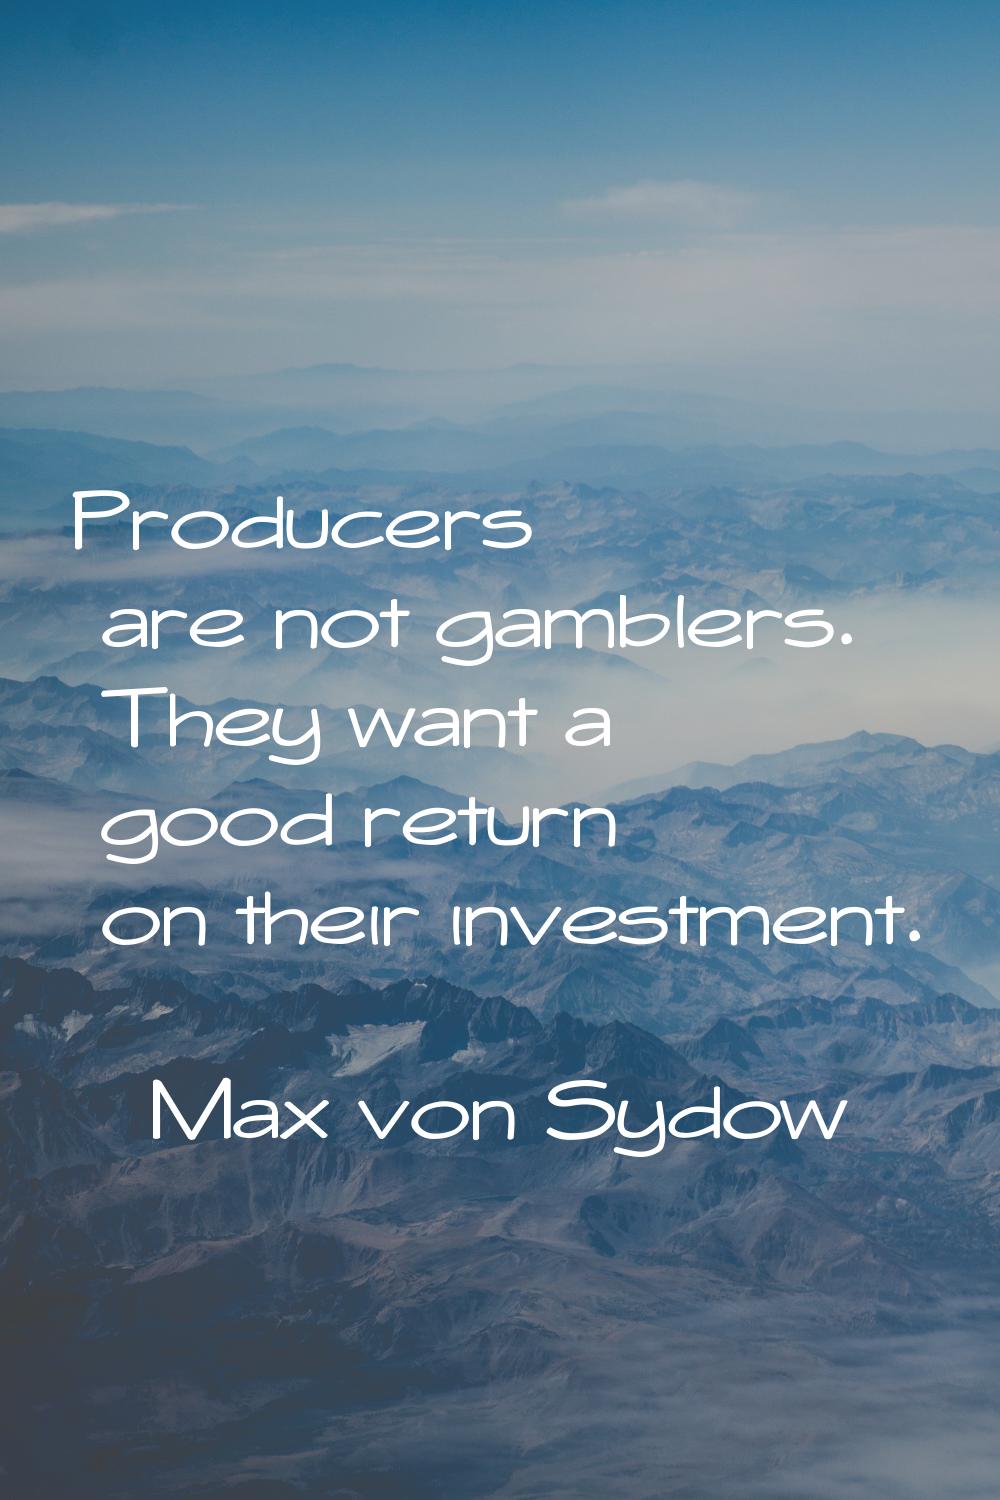 Producers are not gamblers. They want a good return on their investment.